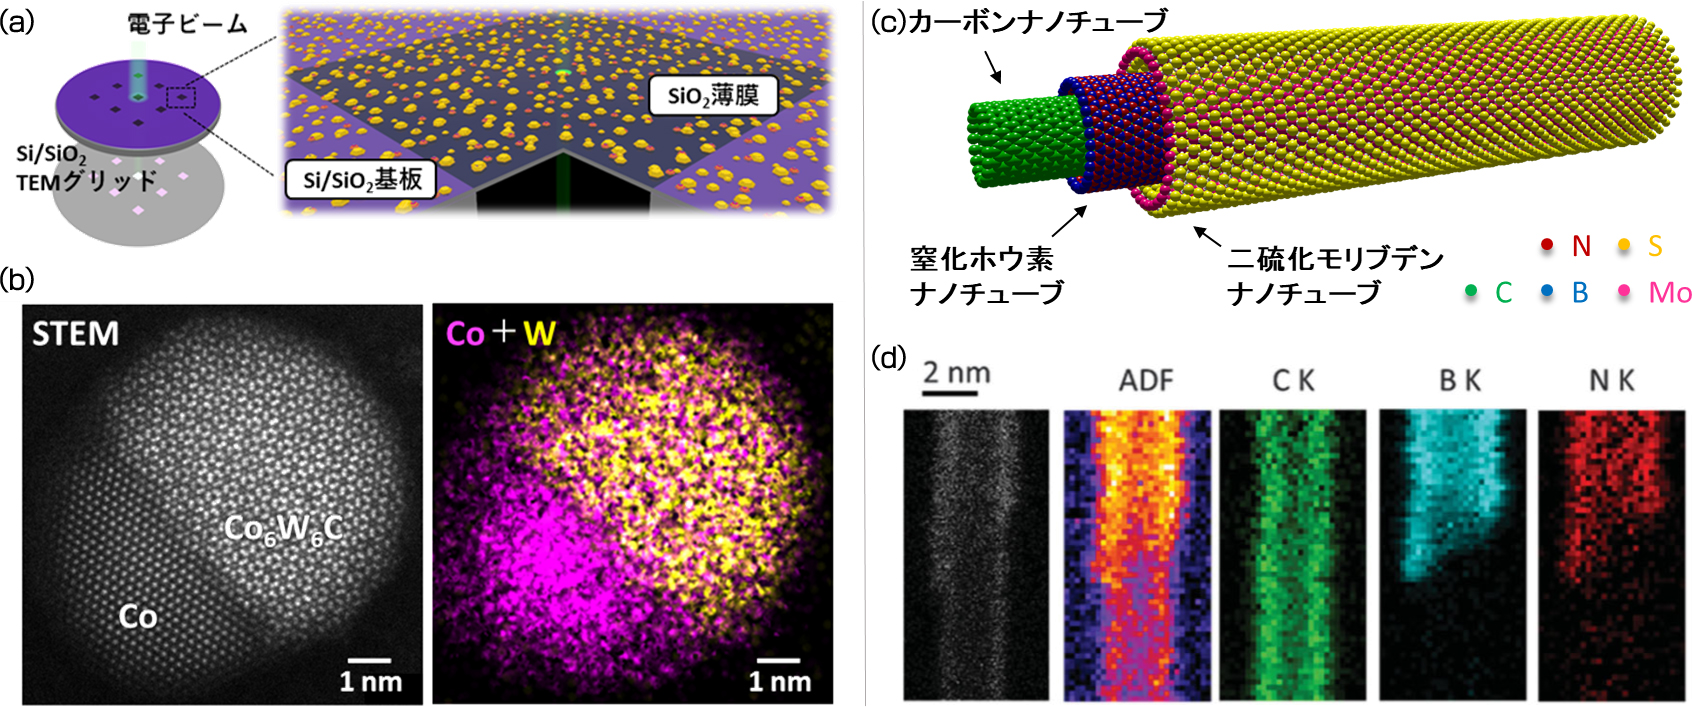 One-dimensional hetero-nanotube structure analysis by non-destructive TEM observation